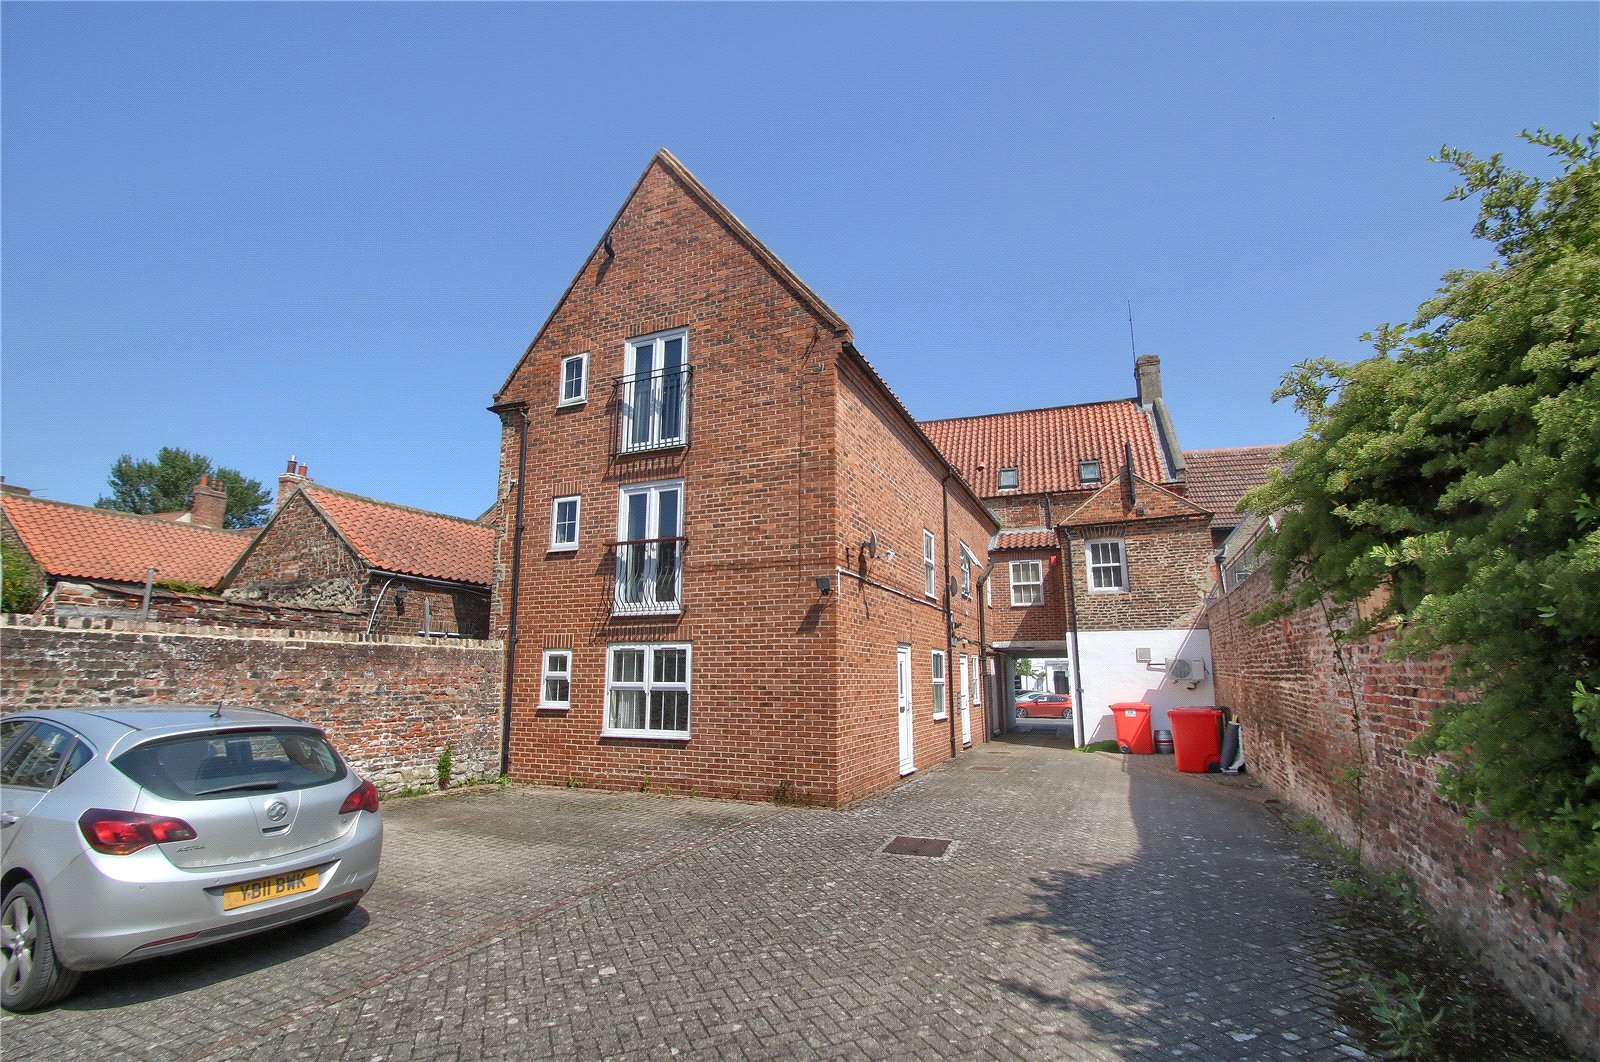 2 bed apartment to rent in High Street, Yarm - Property Image 1